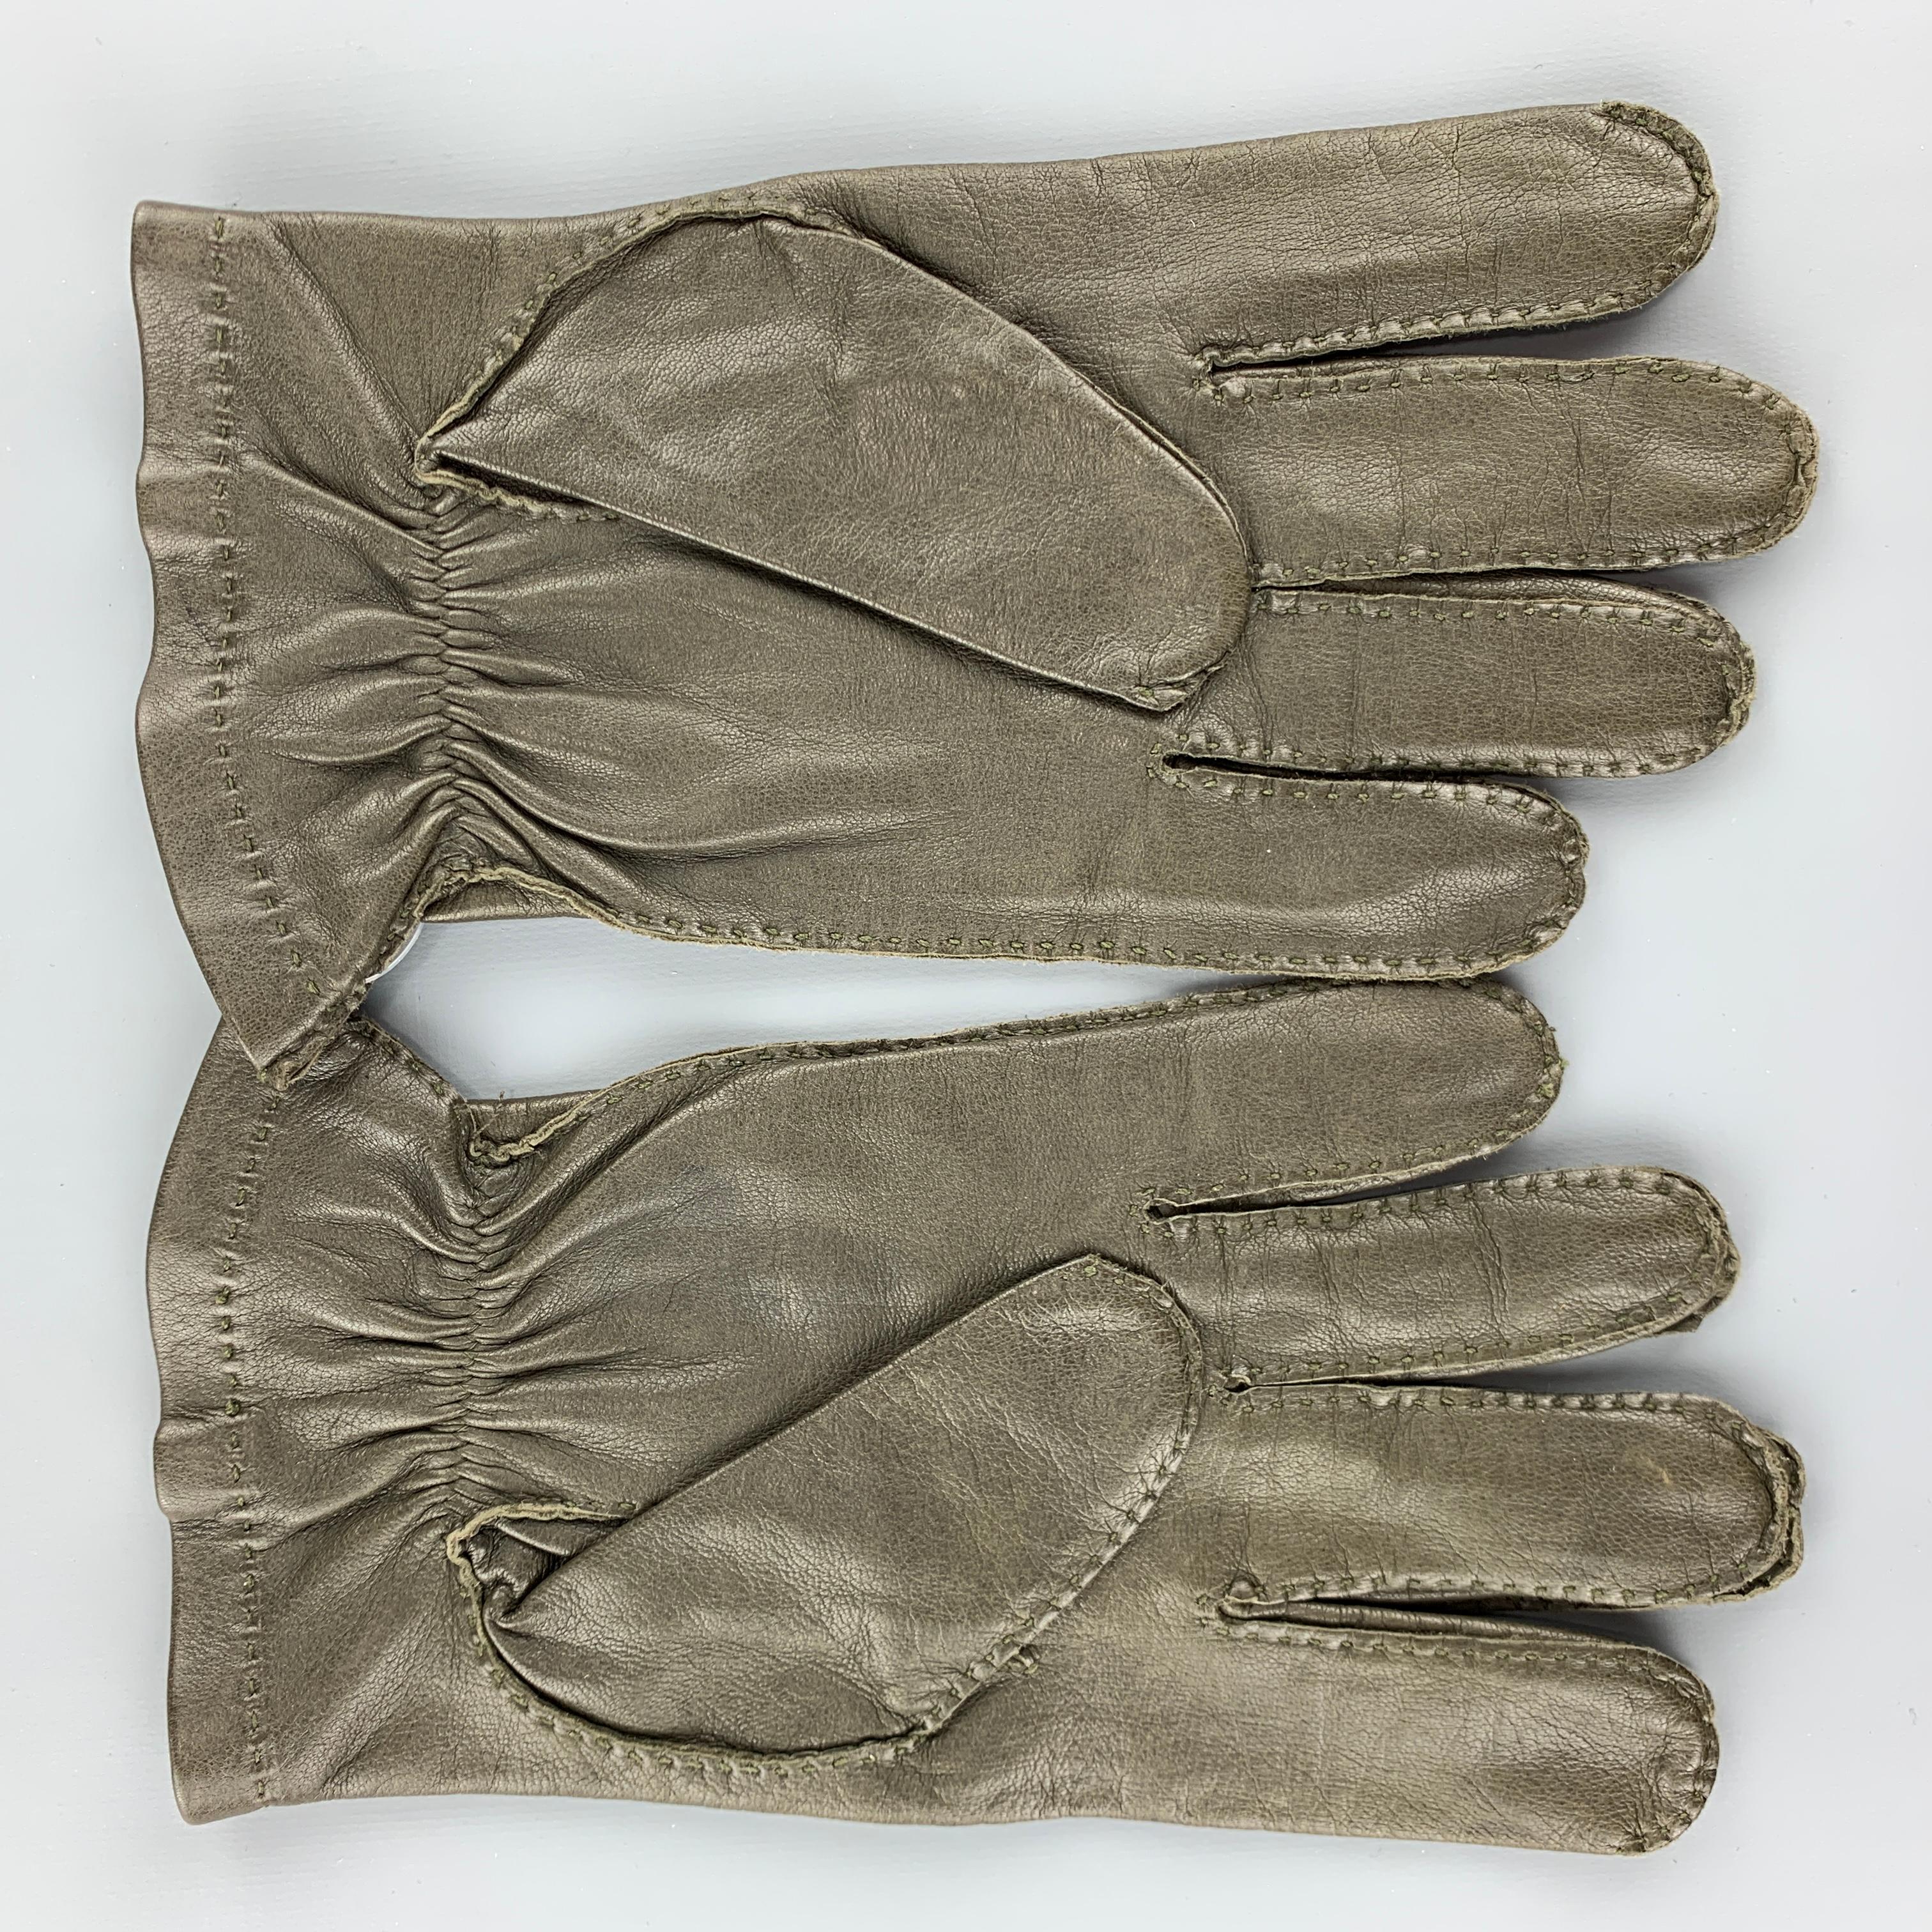 Vintage HOLLAND & HOLLAND gloves come in deep olive green leather with top stitching, elasticized cuff and silk lining. 

Very Good Pre-Owned Condition.
Marked: 8 1/2

Width: 4.25 in.
Length: 9.25 in.